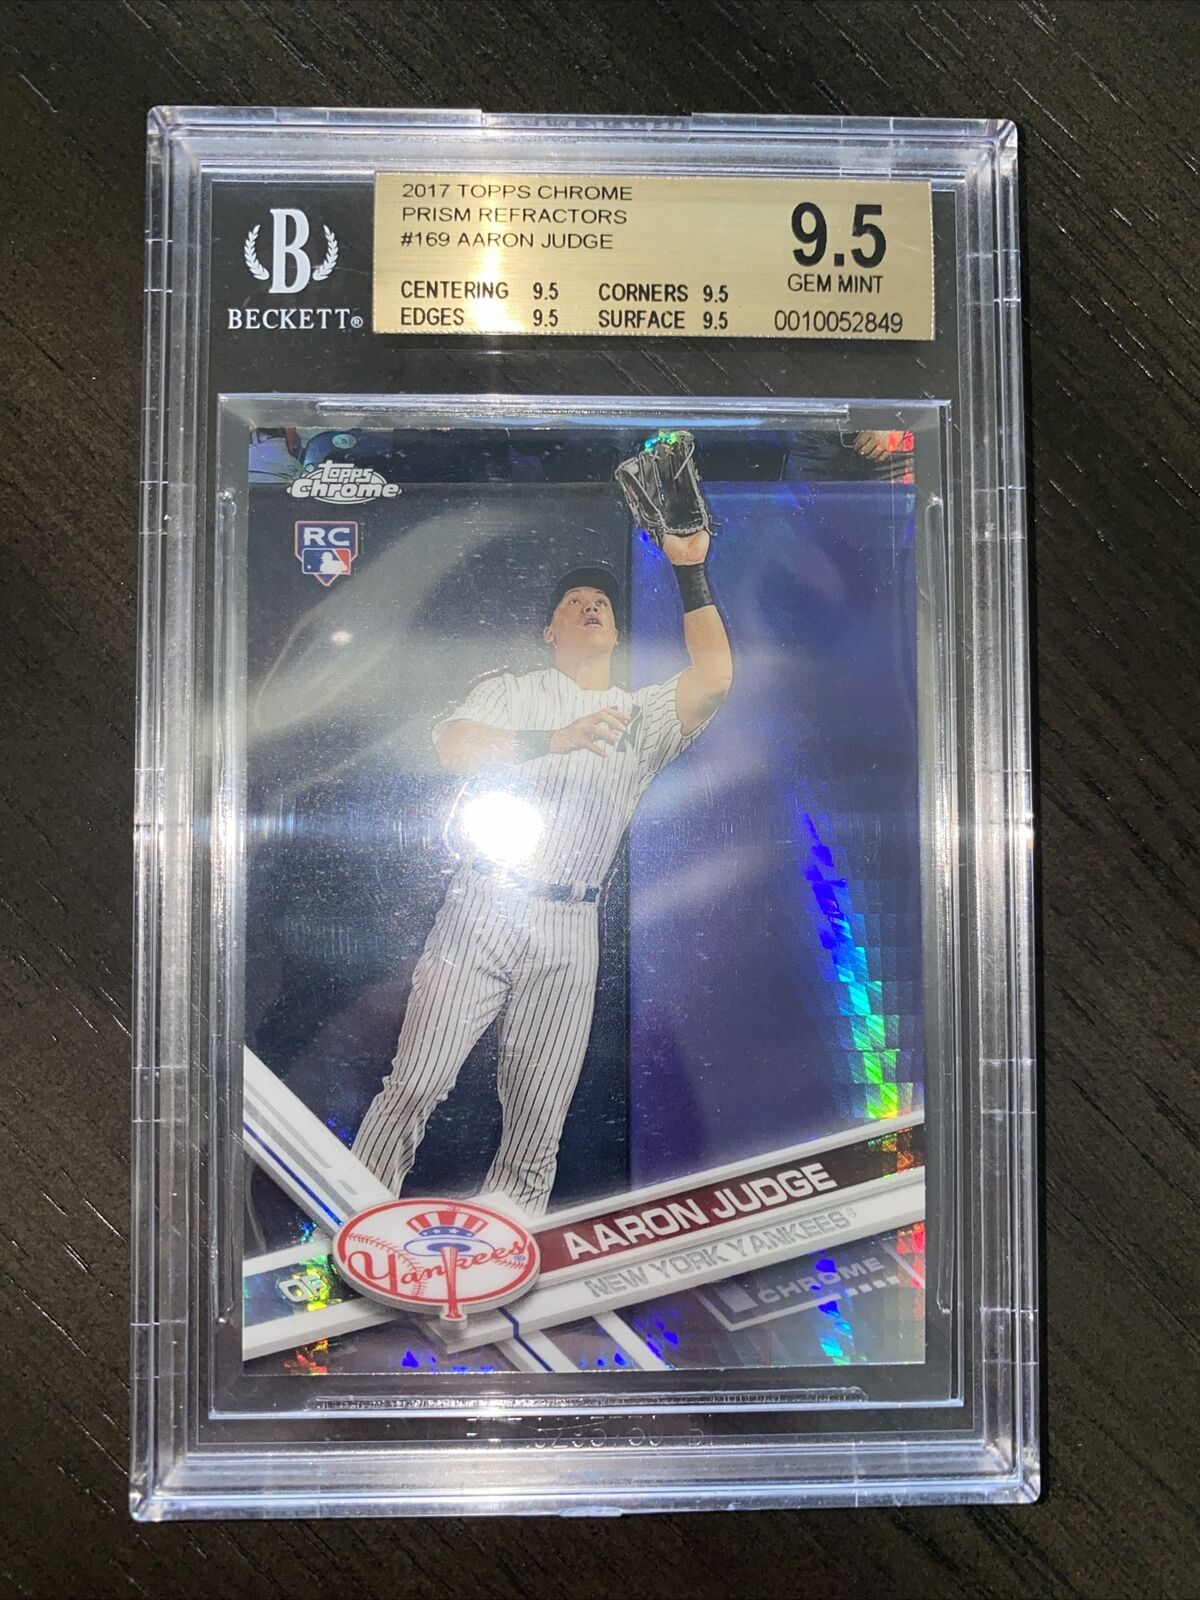 AARON JUDGE 2017 TOPPS CHROME #169 PRISM REFRACTOR ROOKIE RC ALL BGS 9.5 SUBS